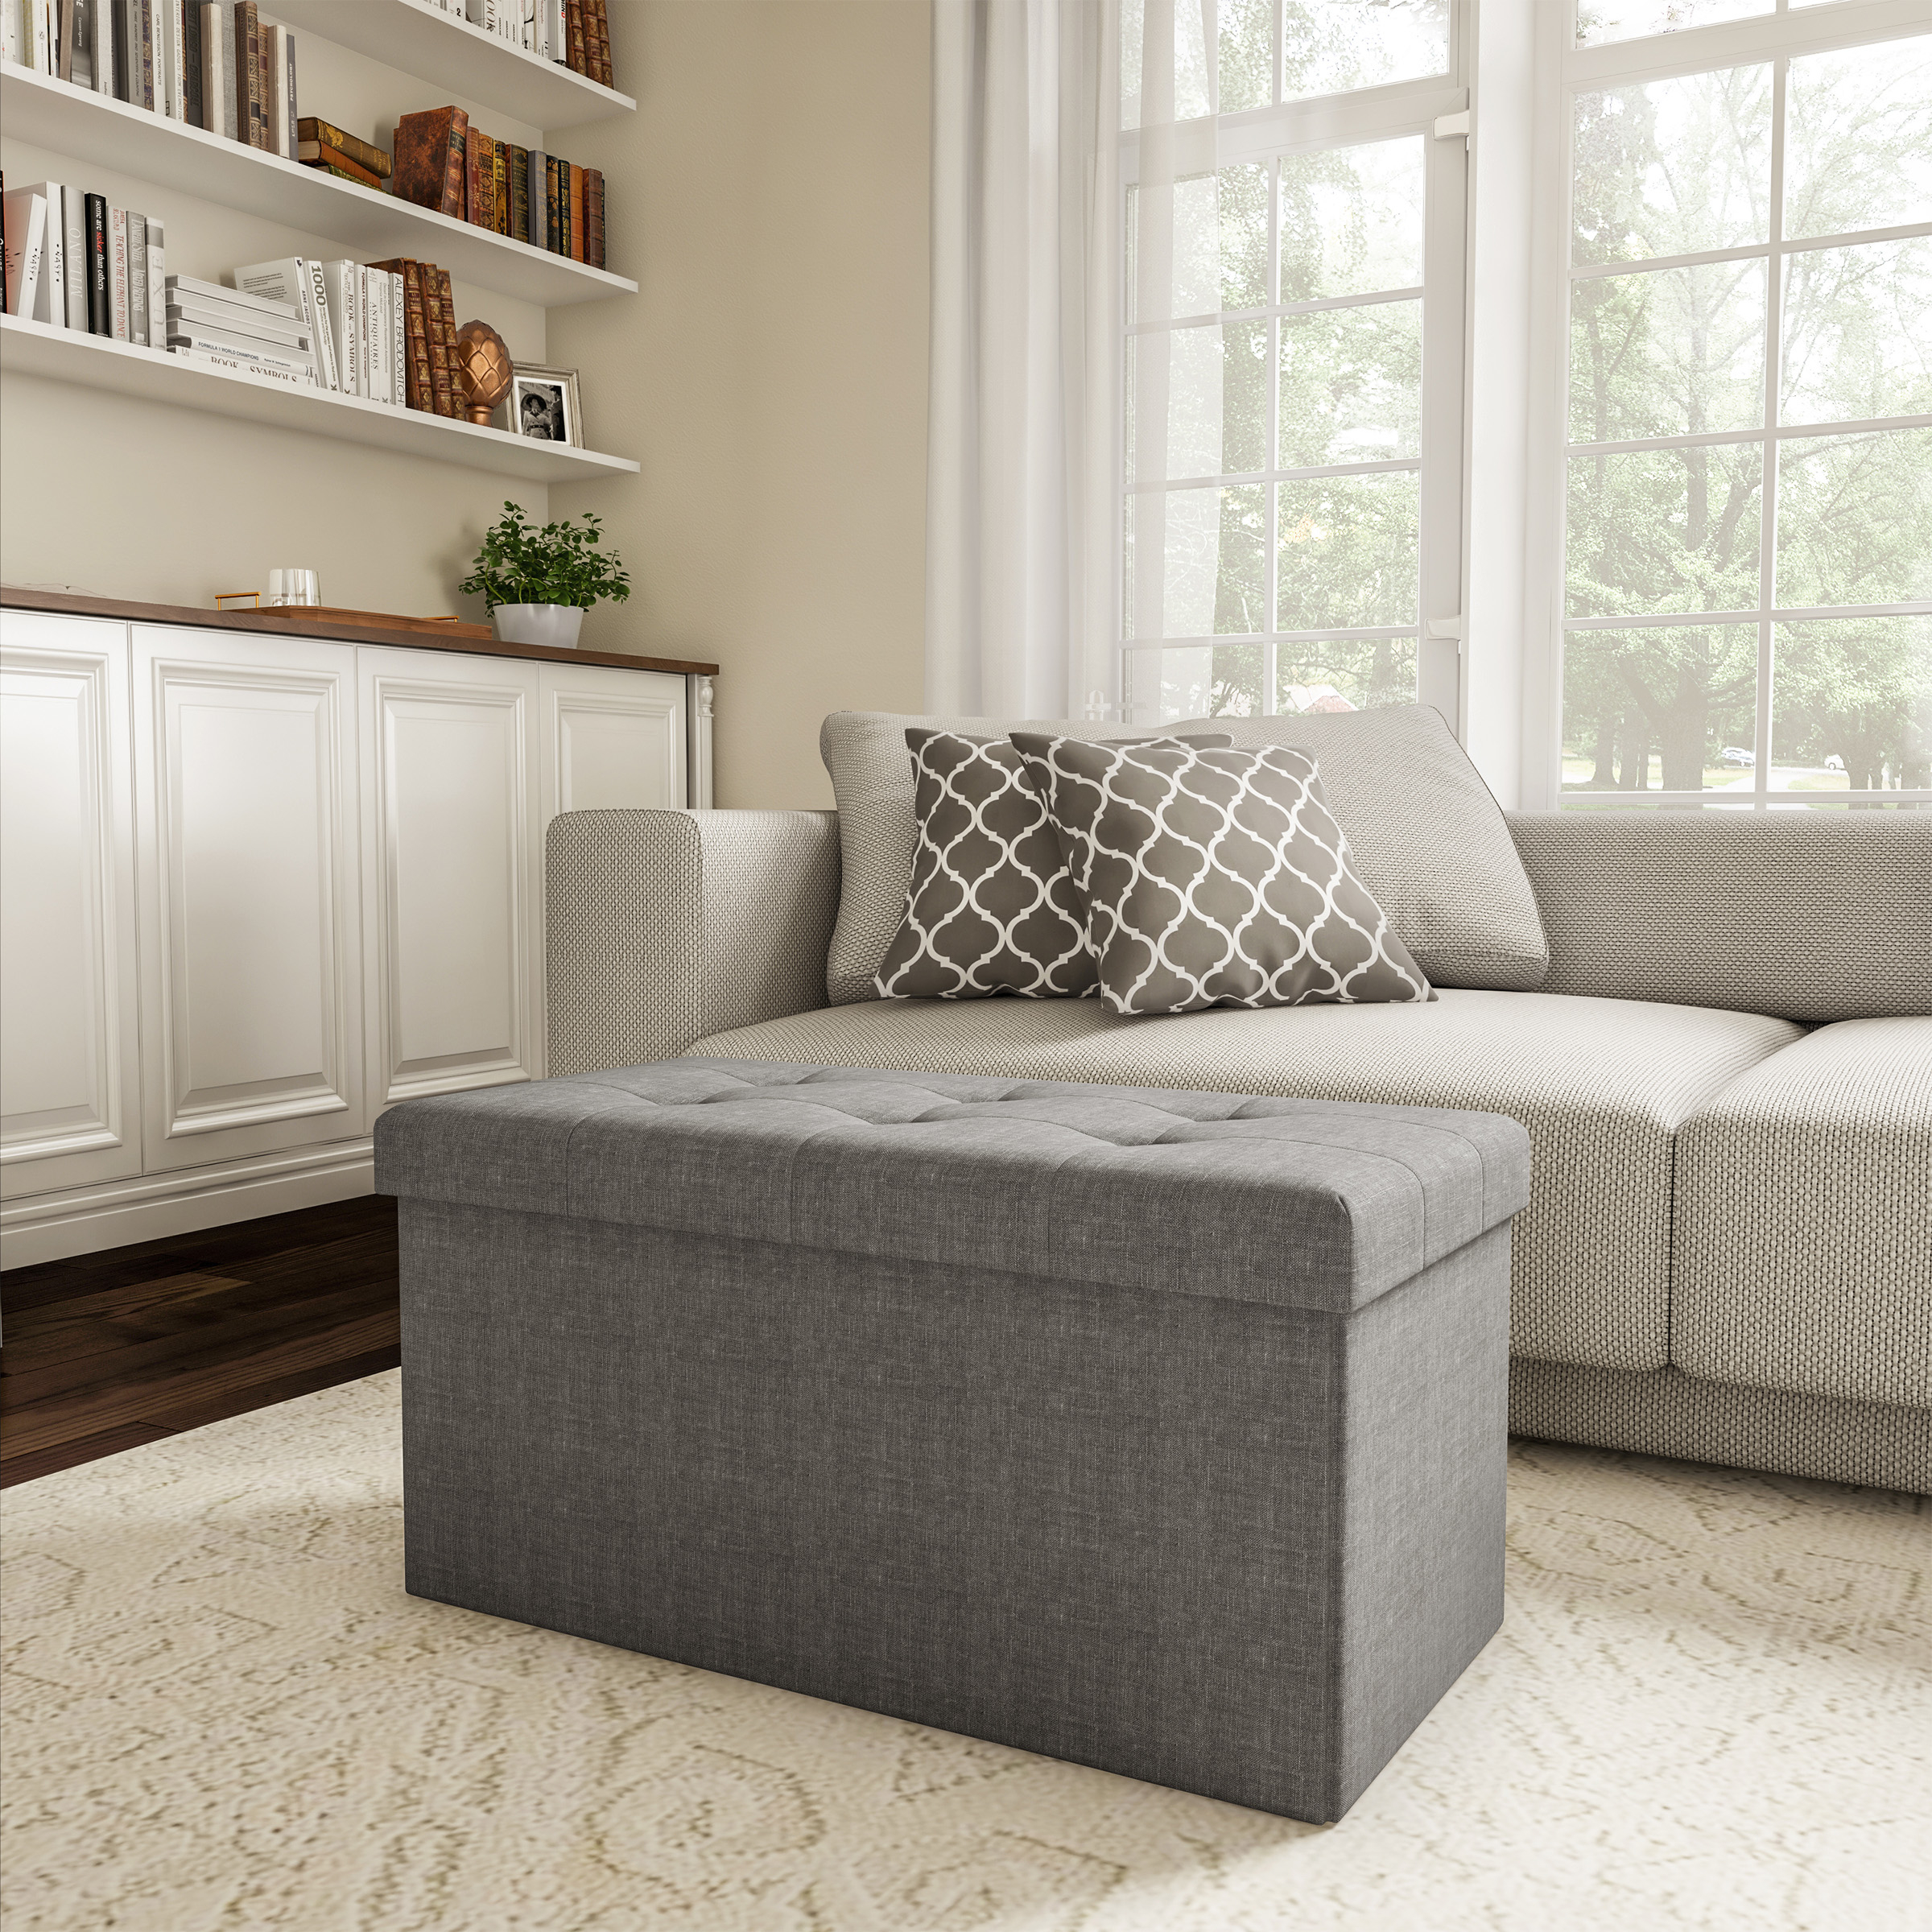 Large Folding Gray Foot Stool Storage Ottoman Bench And Lid 30 X 15 X 15 For Seat Or Feet